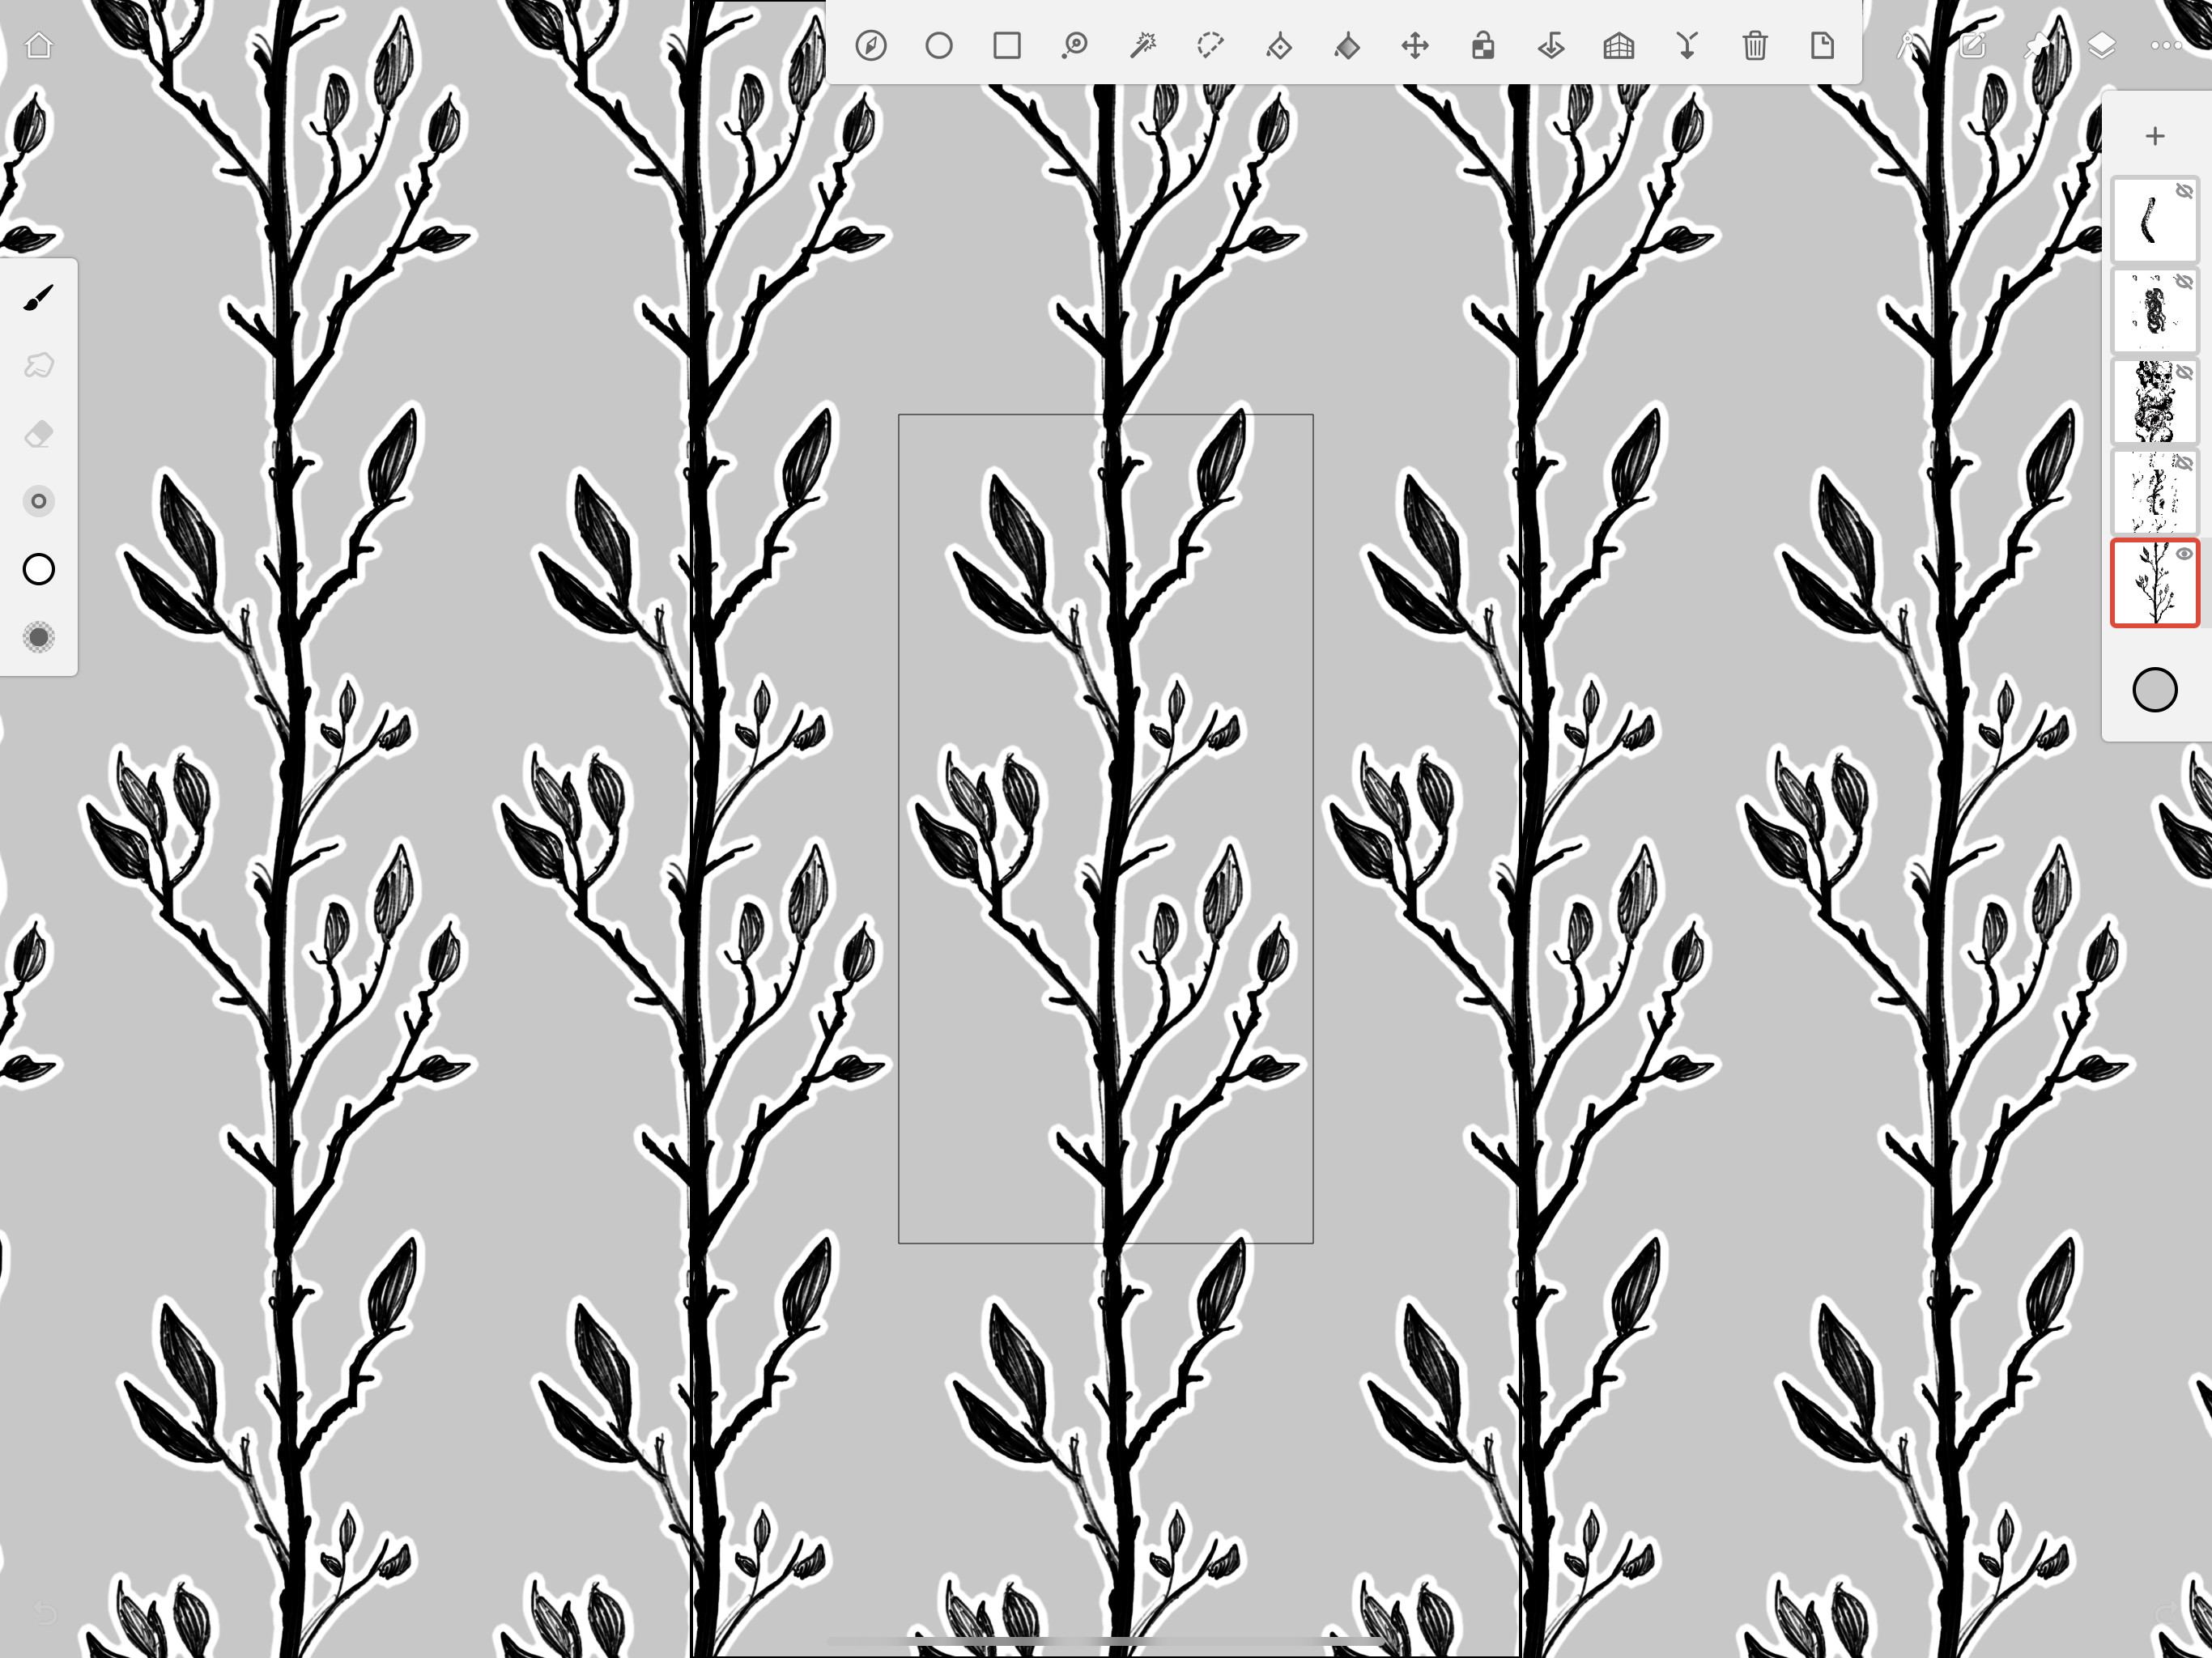 Sample of a pattern project for brush making